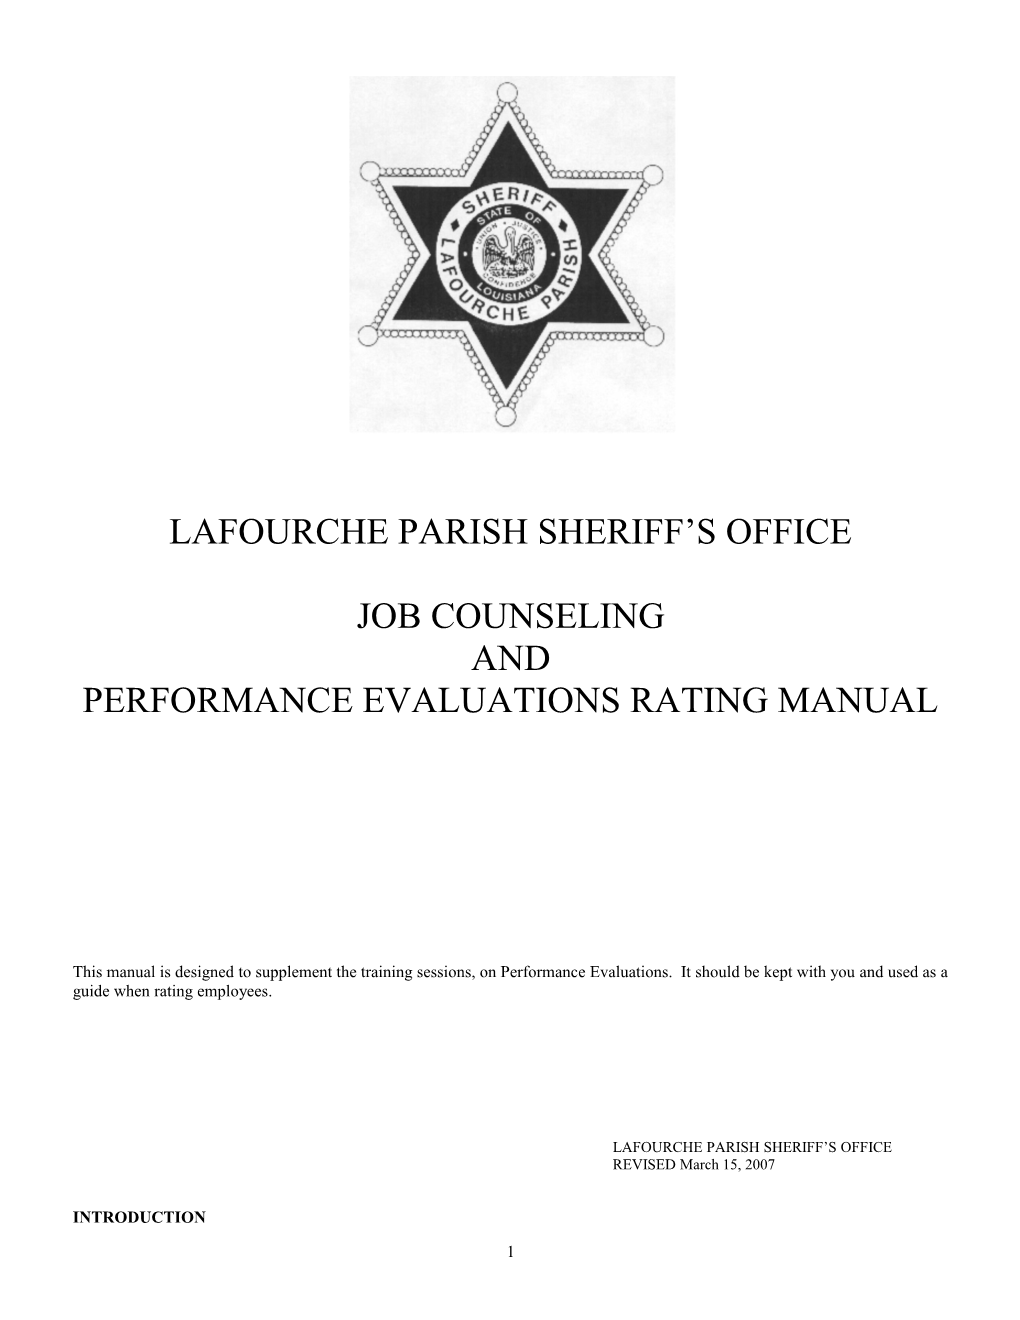 Job Counseling and Evaluation Report